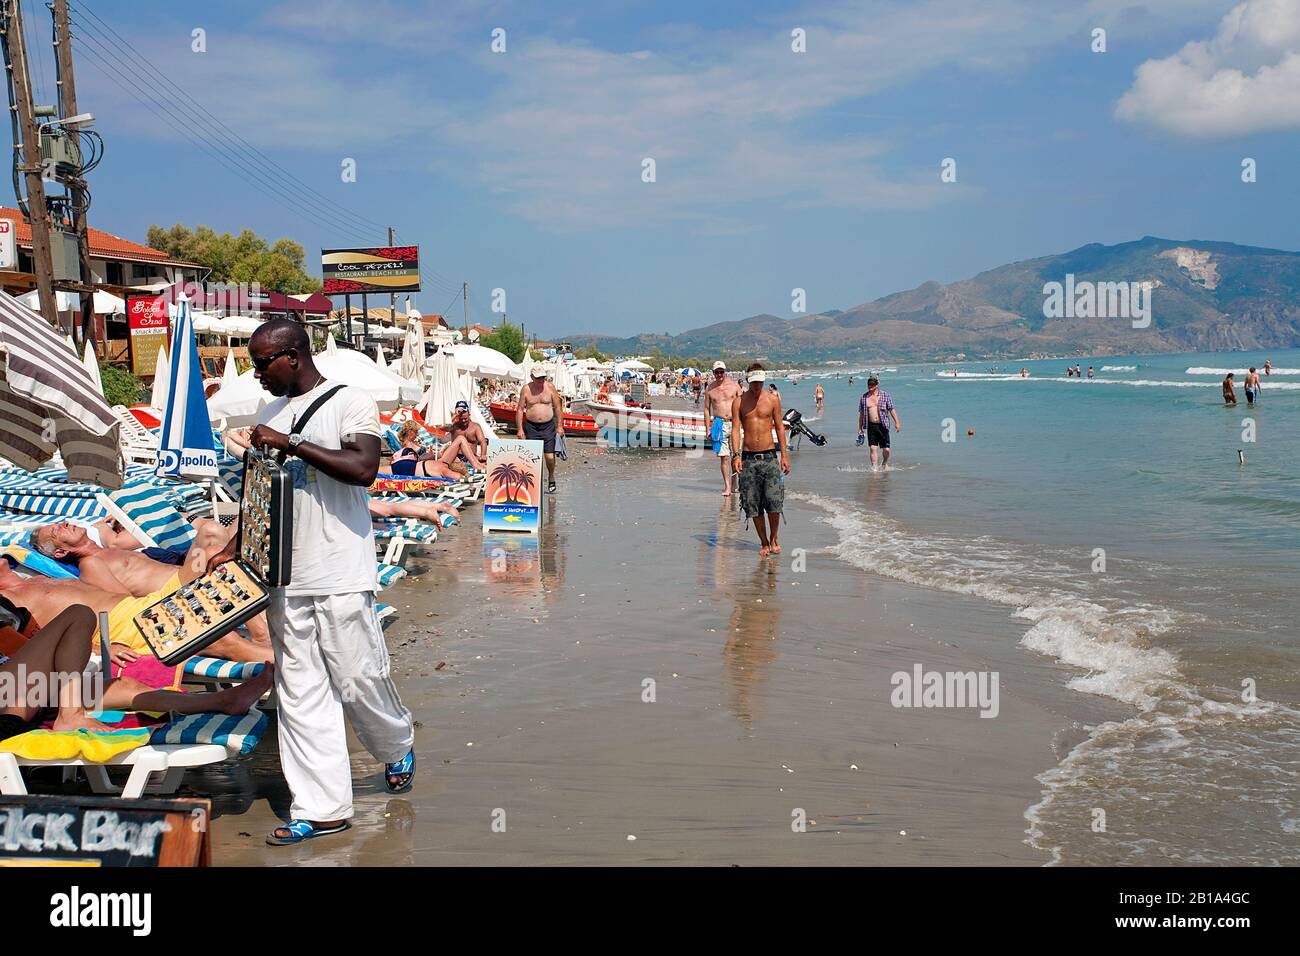 Dark-skinned immigrant sells watches at the beach of Laganas, Zakynthos Stock Photo